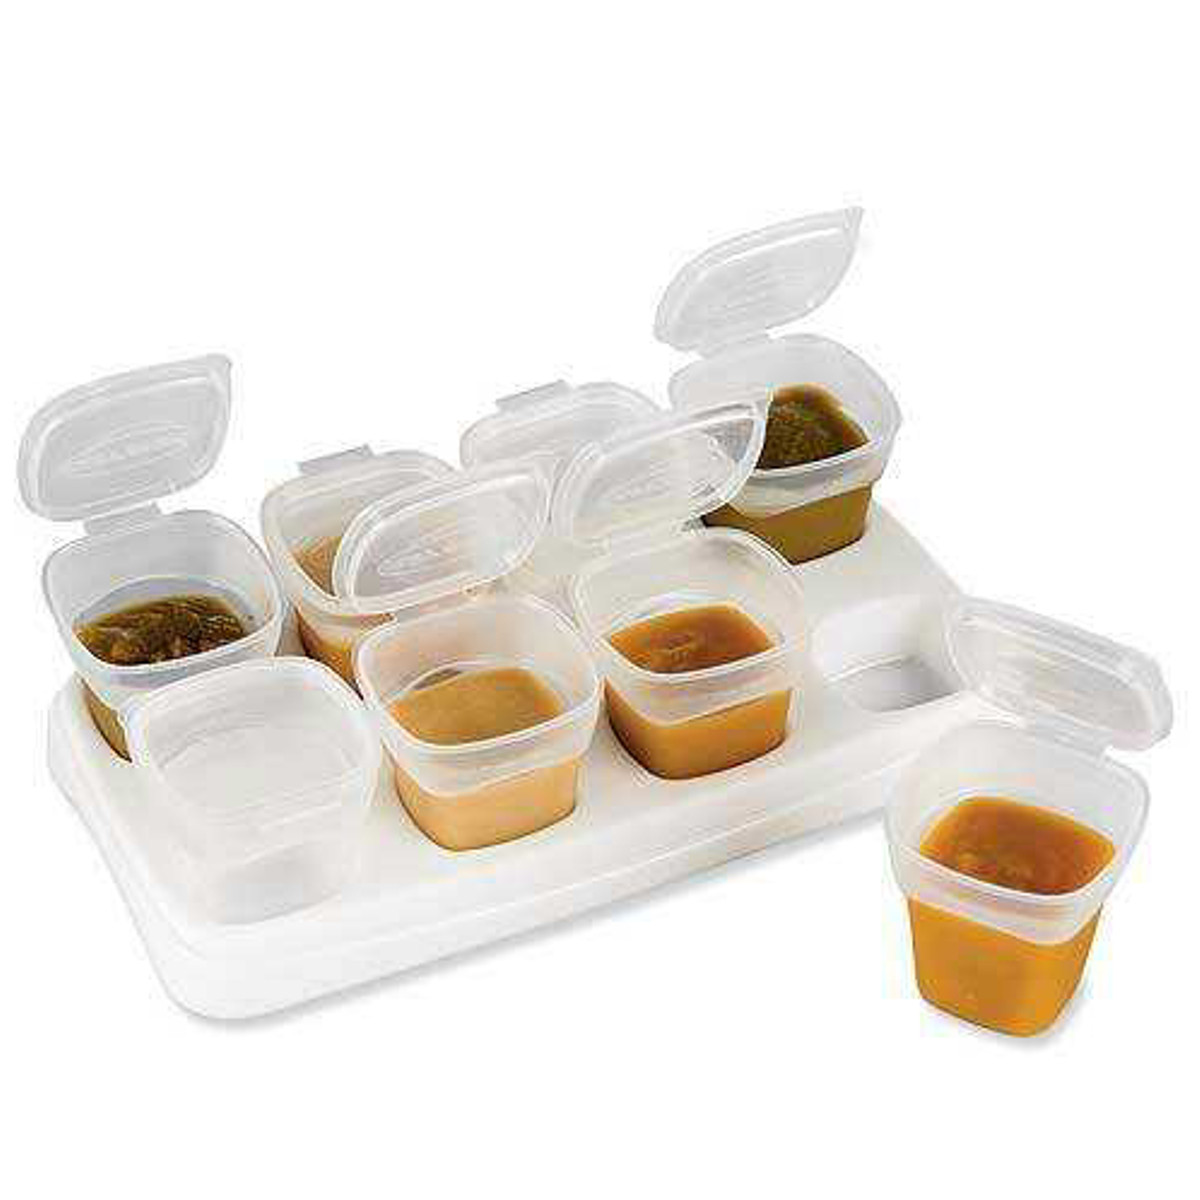 

8x70ml Baby Weaning Food Freezing Cubes Feeding Pots Tray Storage Gruel Rice BPA Free Containers Box